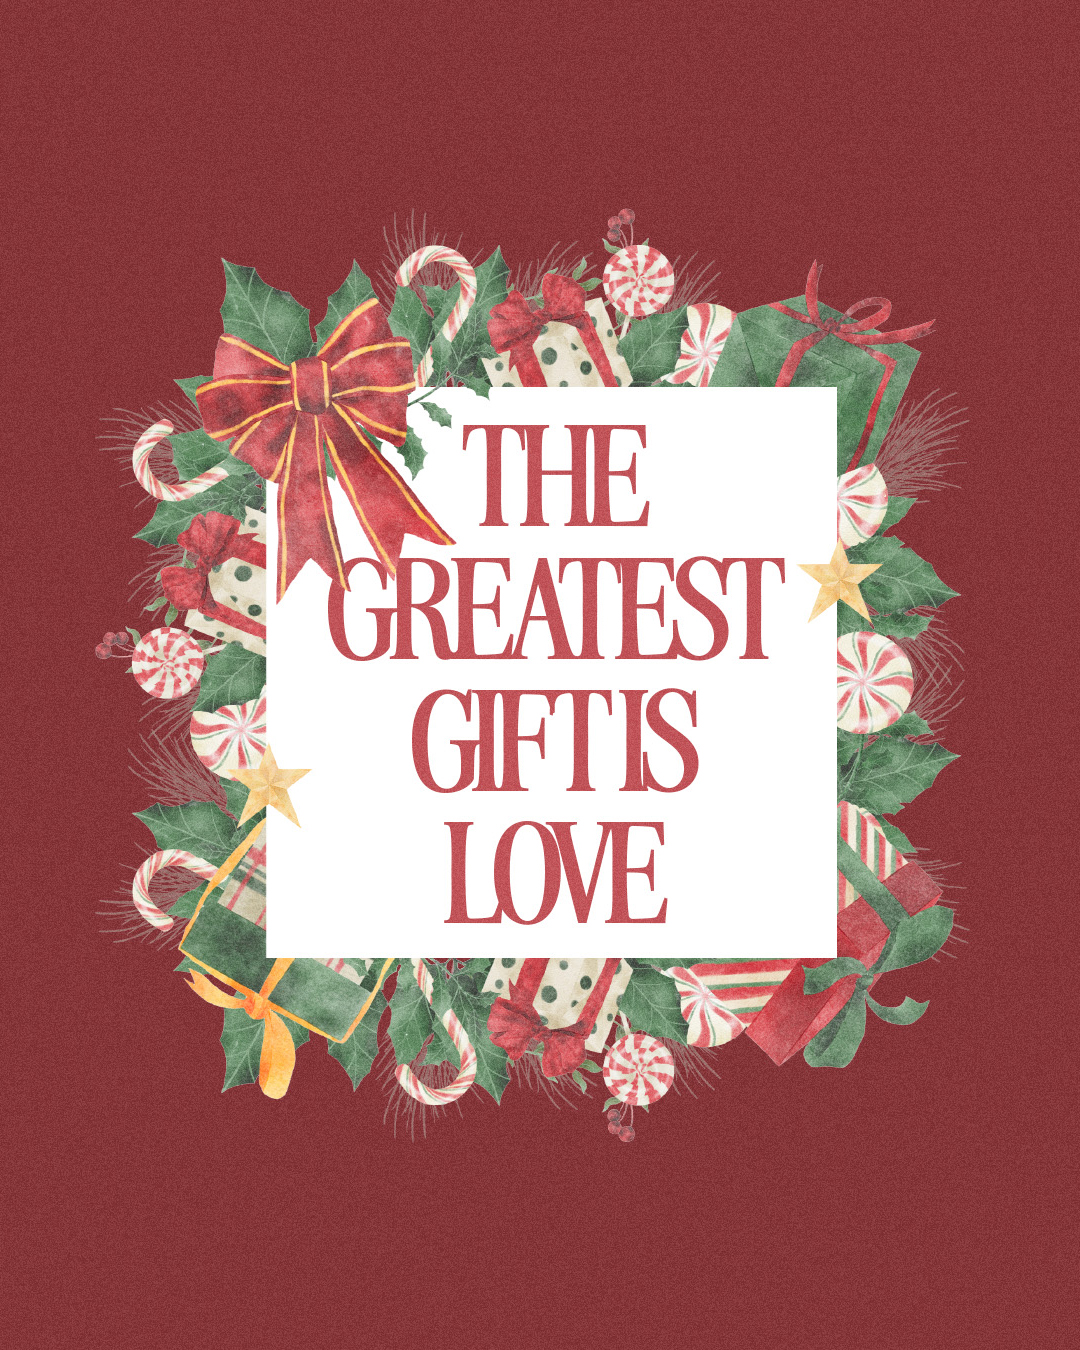 The Greatest Gift is Love